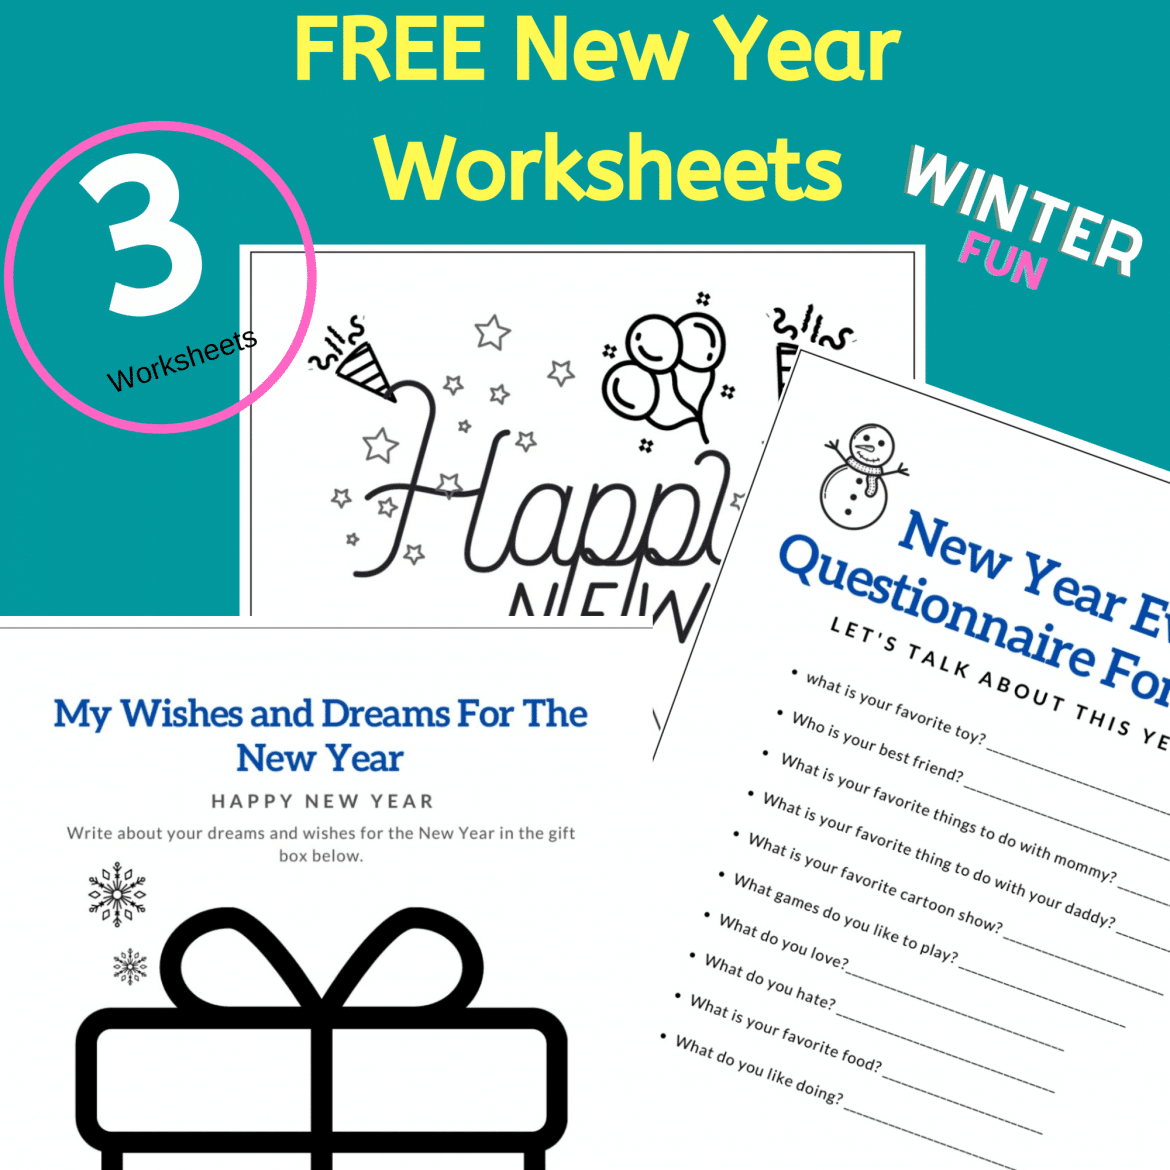 Get 3 Free Printable New Year Worksheets along with fun winter activities ideas for this New Year's Eve! Perfect for creating beautiful keepsake memories with your kids. #freenewyearworksheets #freewinterworksheets #newyearactivitesforkids